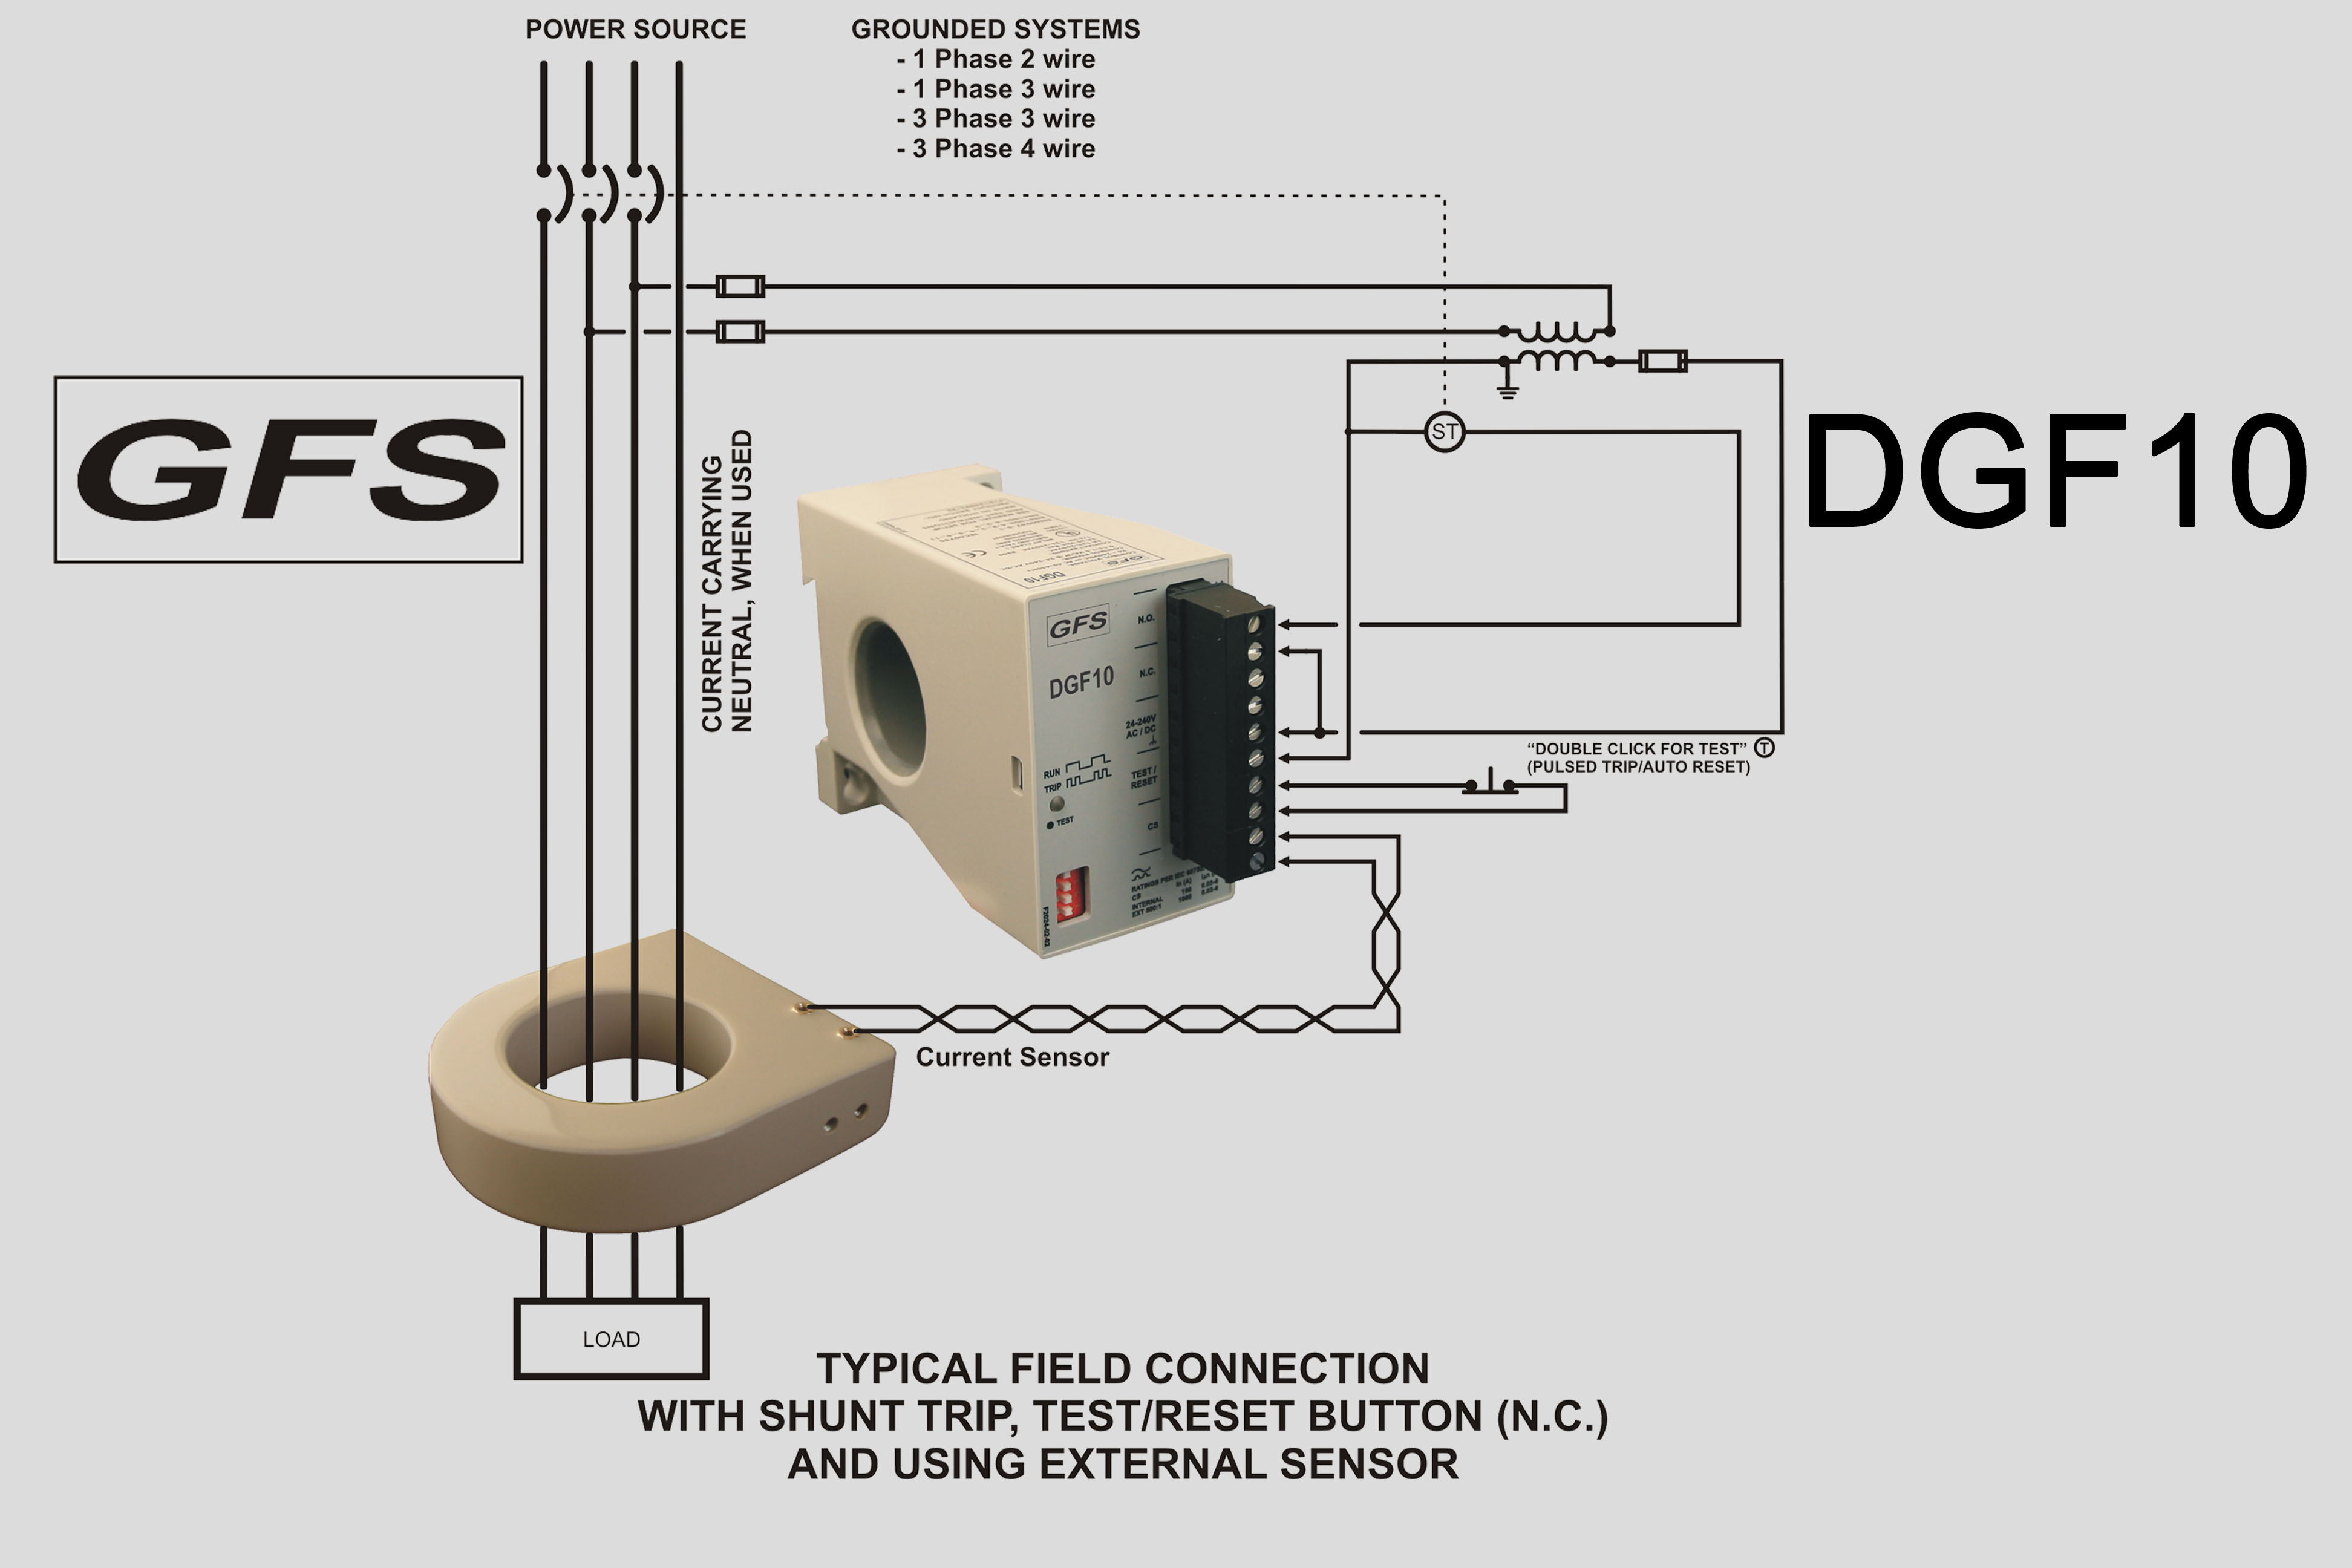 Ground Fault Relay DGF10 typical field connection using external sensor